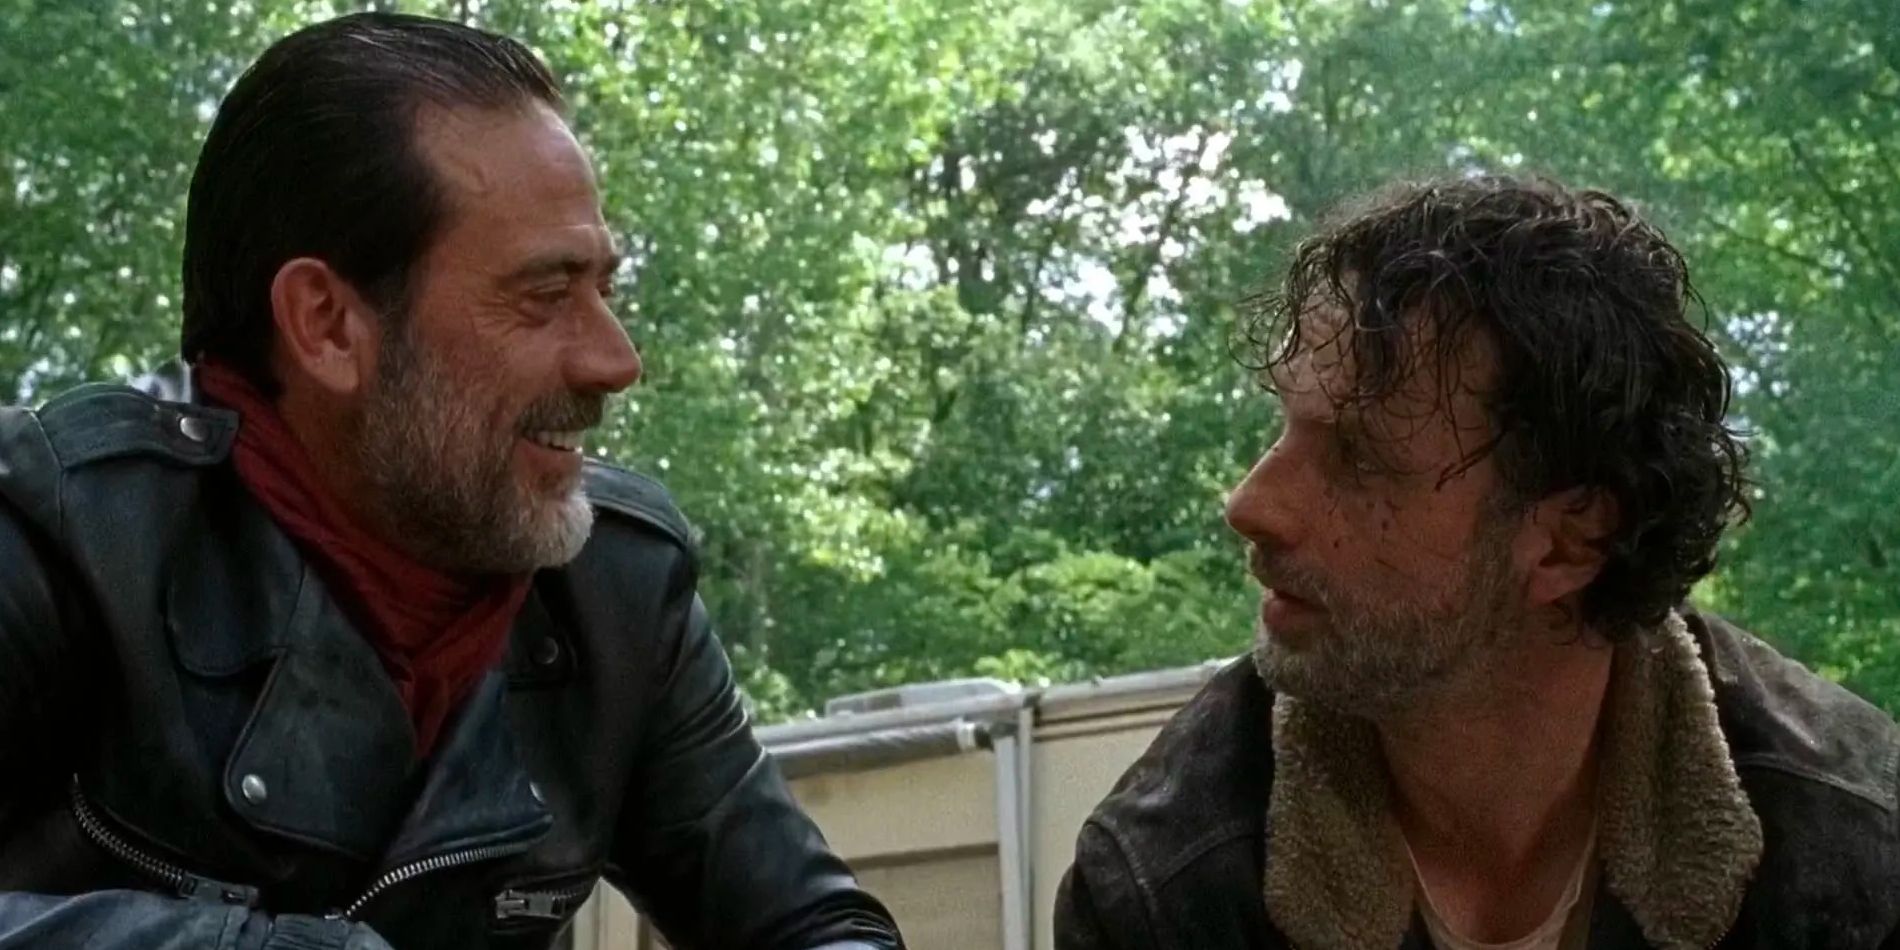 Negan (Jeffrey Dean Morgan) kneels down by Rick (Andrew Lincoln), grinning as he tells him to cut of his son's arm. 